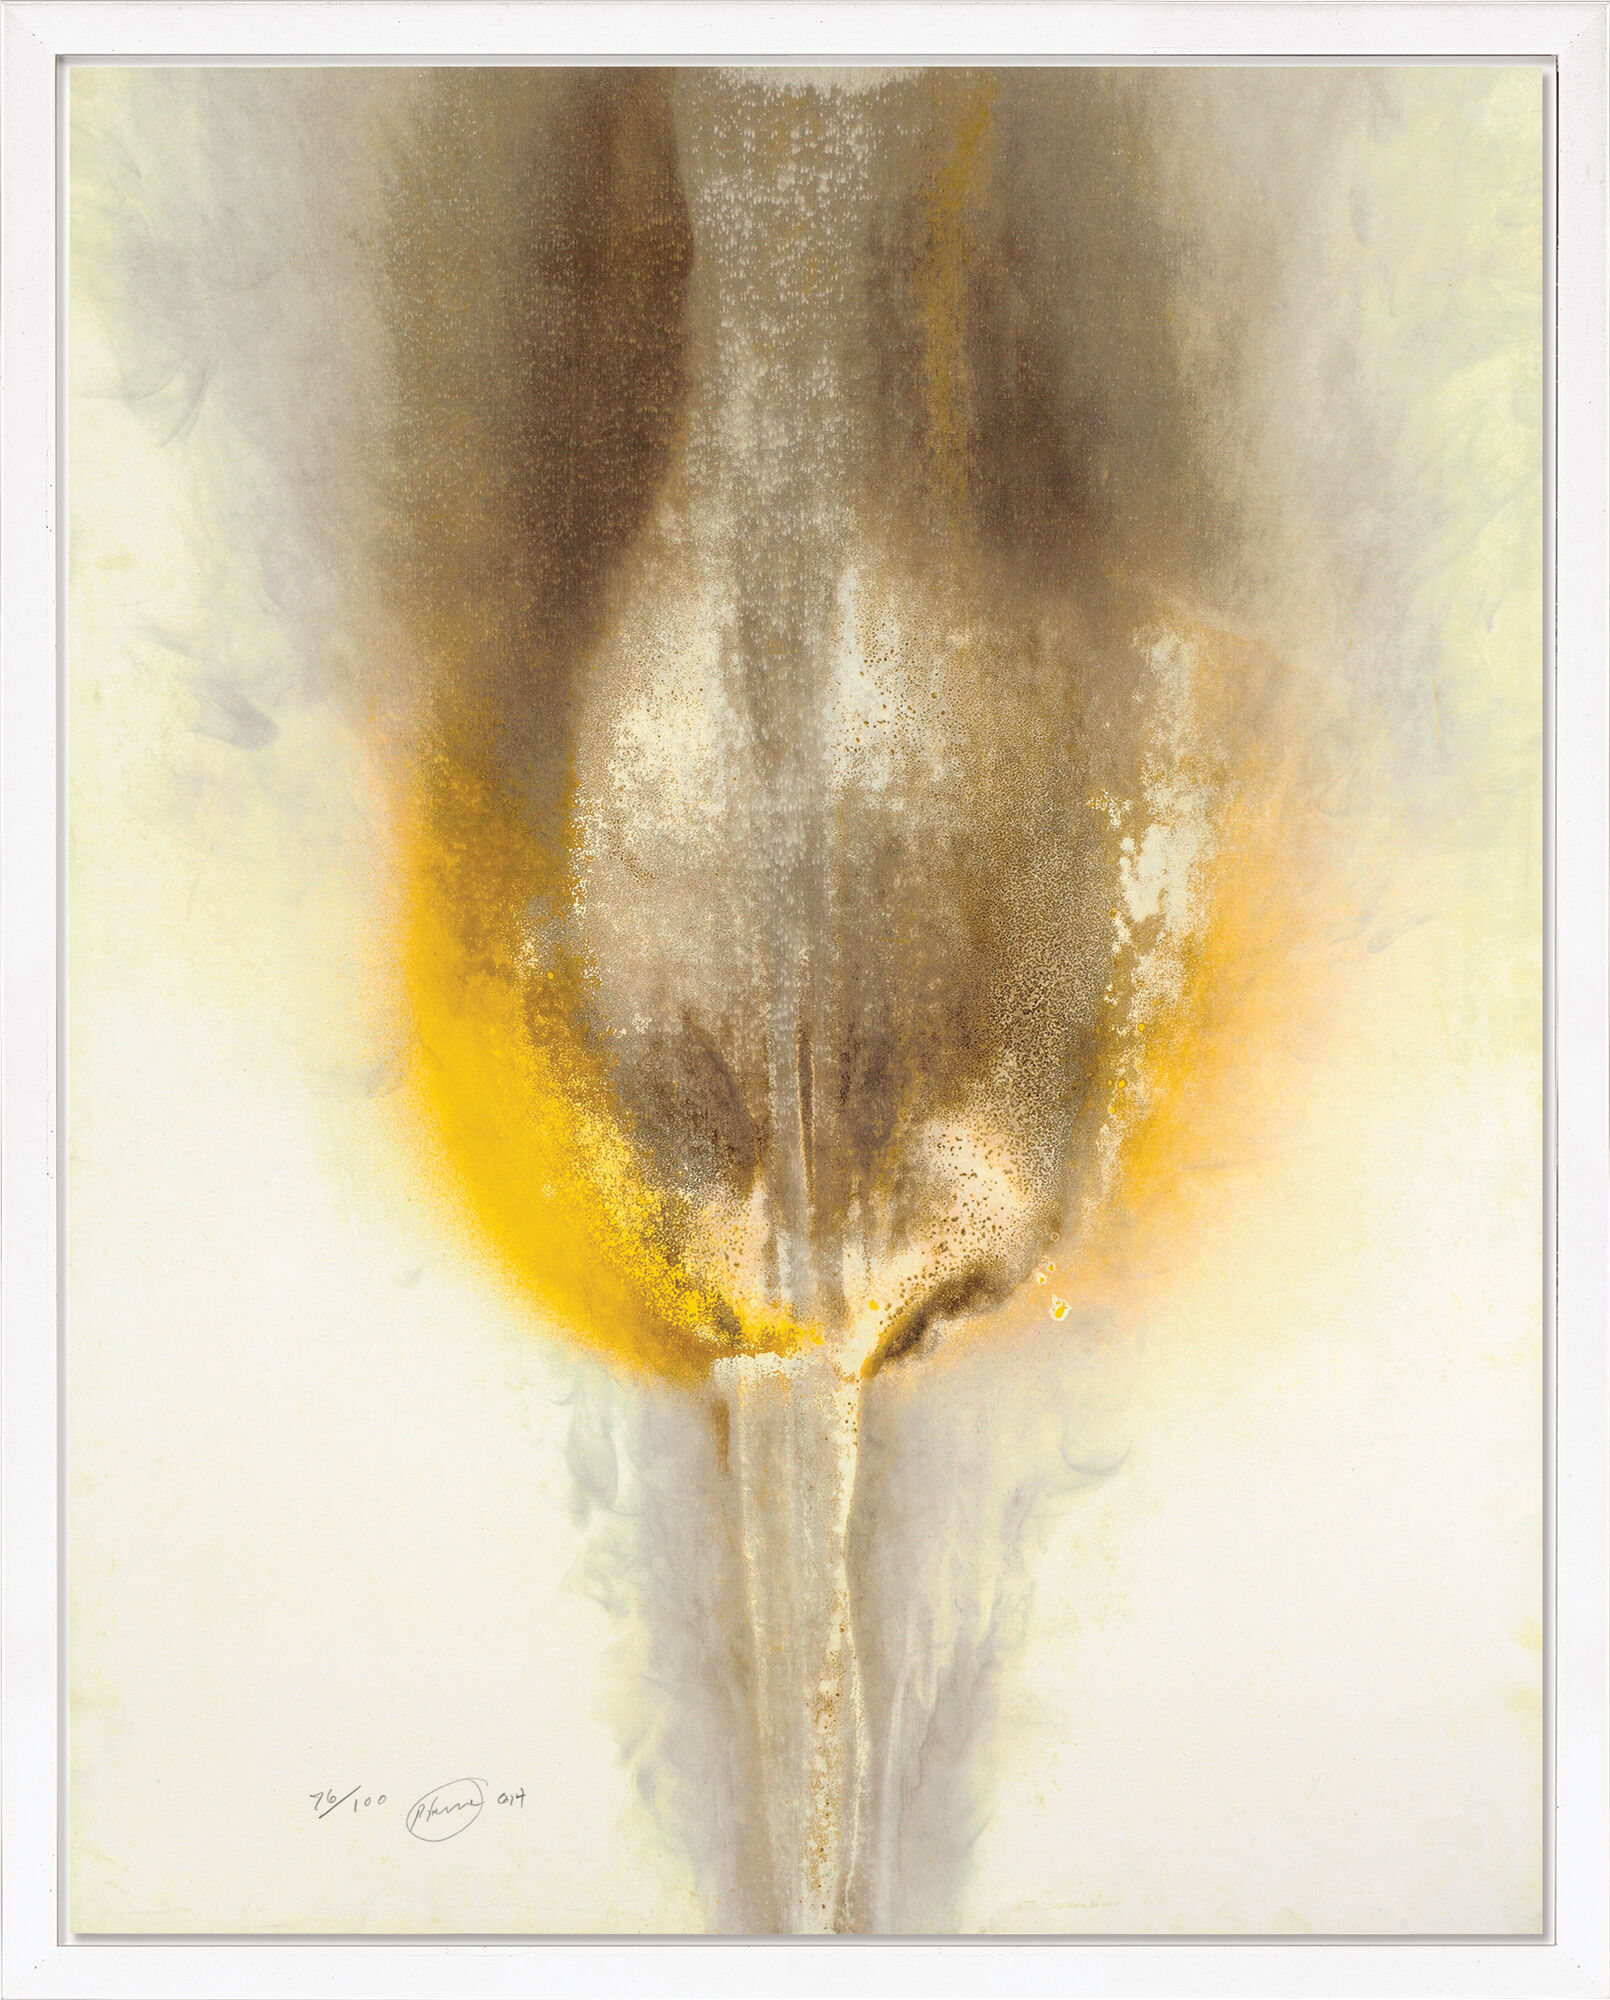 Picture "Lady Fire" (2014) by Otto Piene